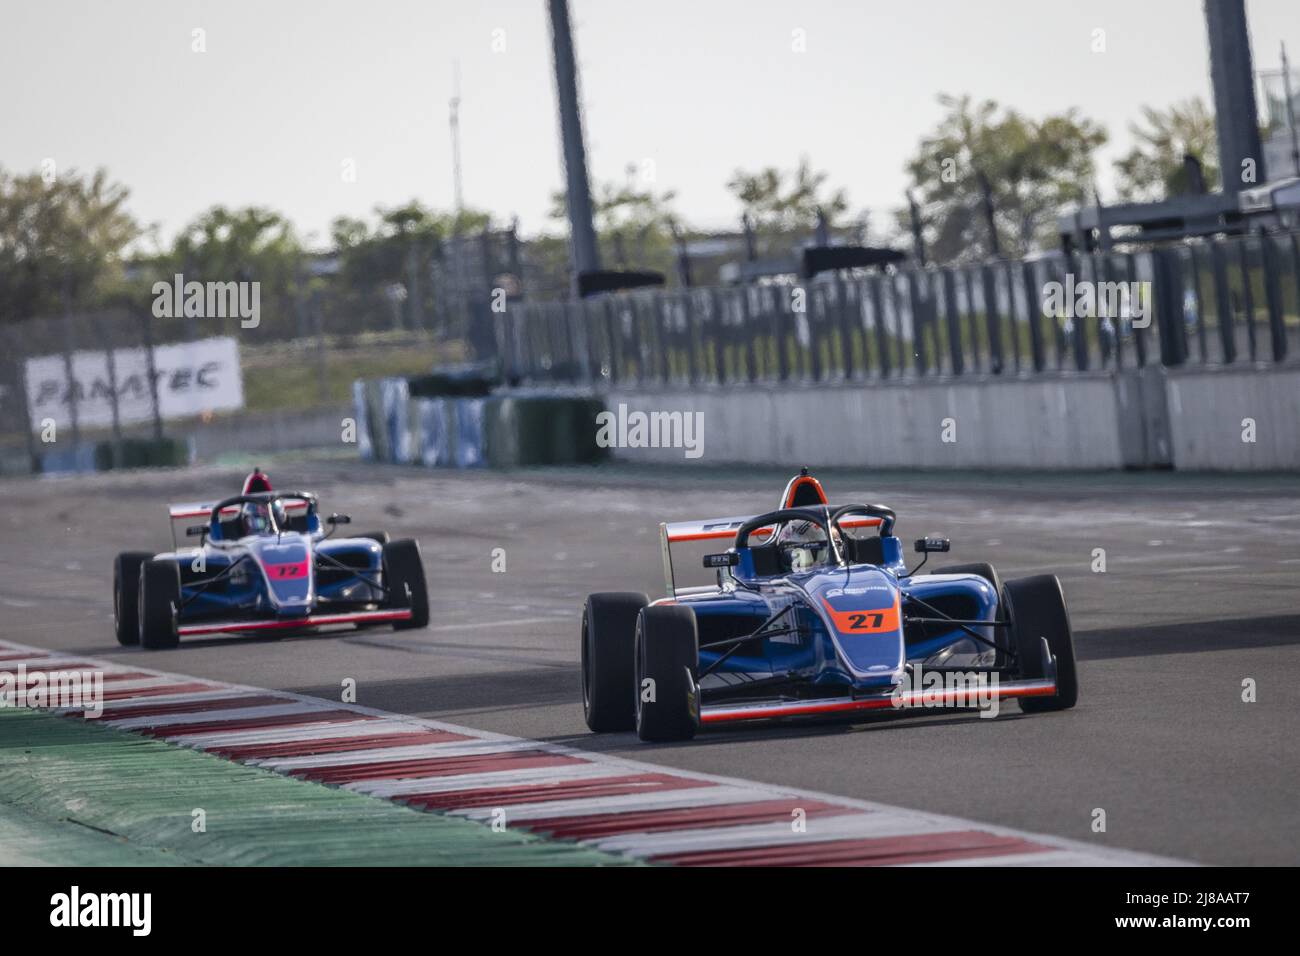 27 PIERRE Edgar (fra), Formule 4 - Mygale Genération 2, action during the 3rd round of the Championnat de France FFSA F4 2022, from May 13 to 15 on the Circuit de Nevers Magny-Cours in Magny-Cours, France - Photo Marc de Mattia / DPPI Stock Photo